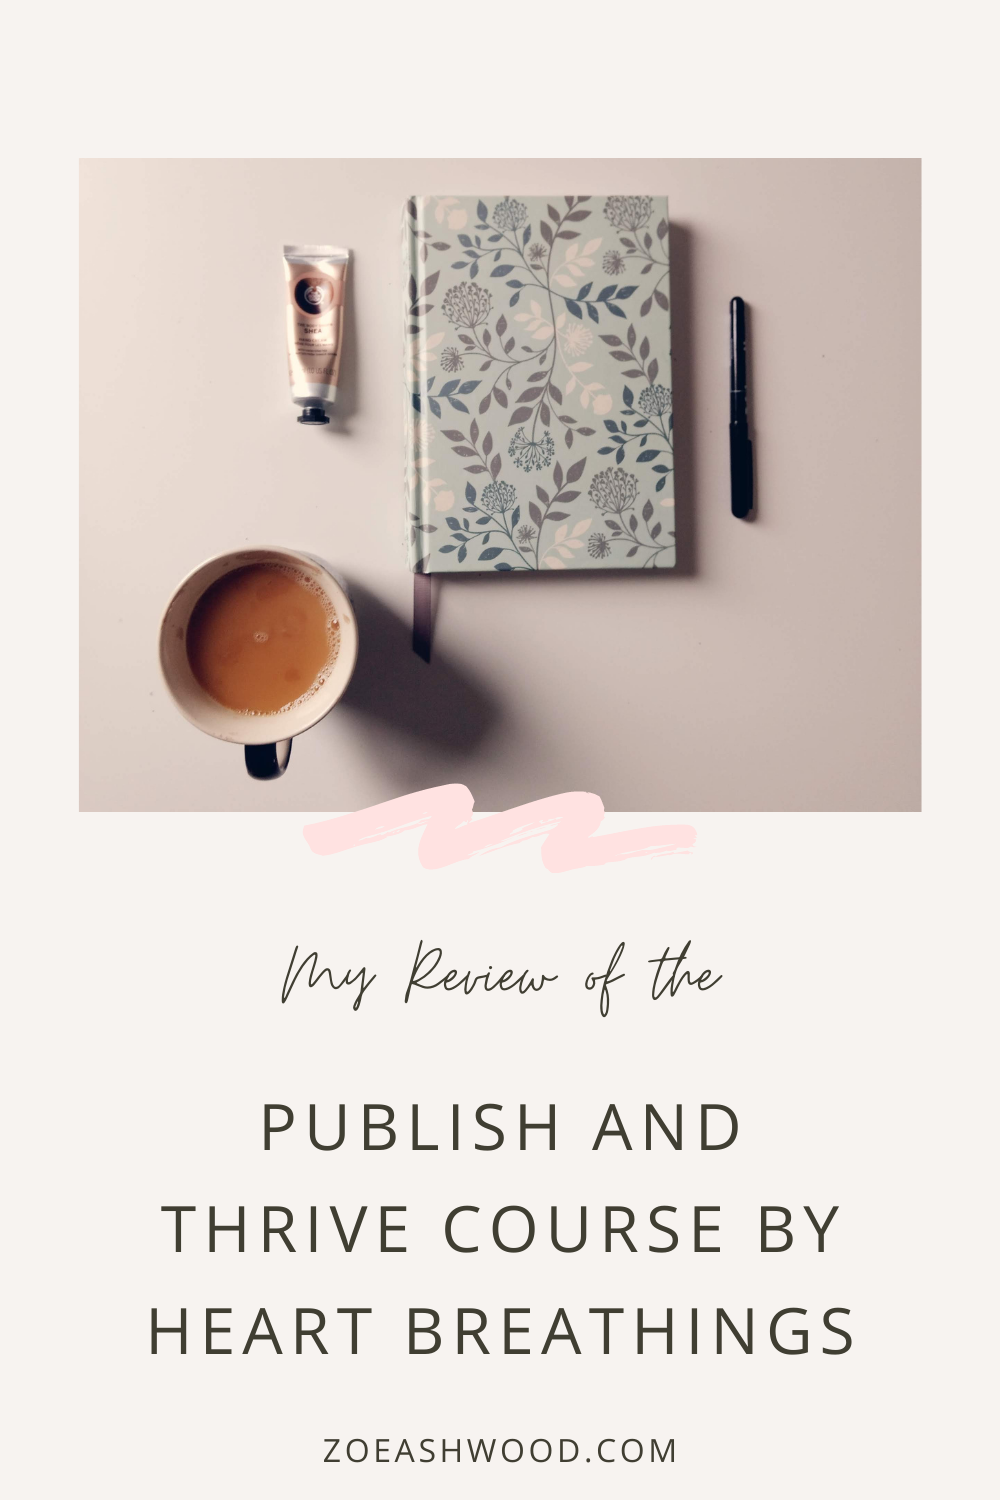 Publish and Thrive by Heart Breathings - Course Review by Zoe Ashwood